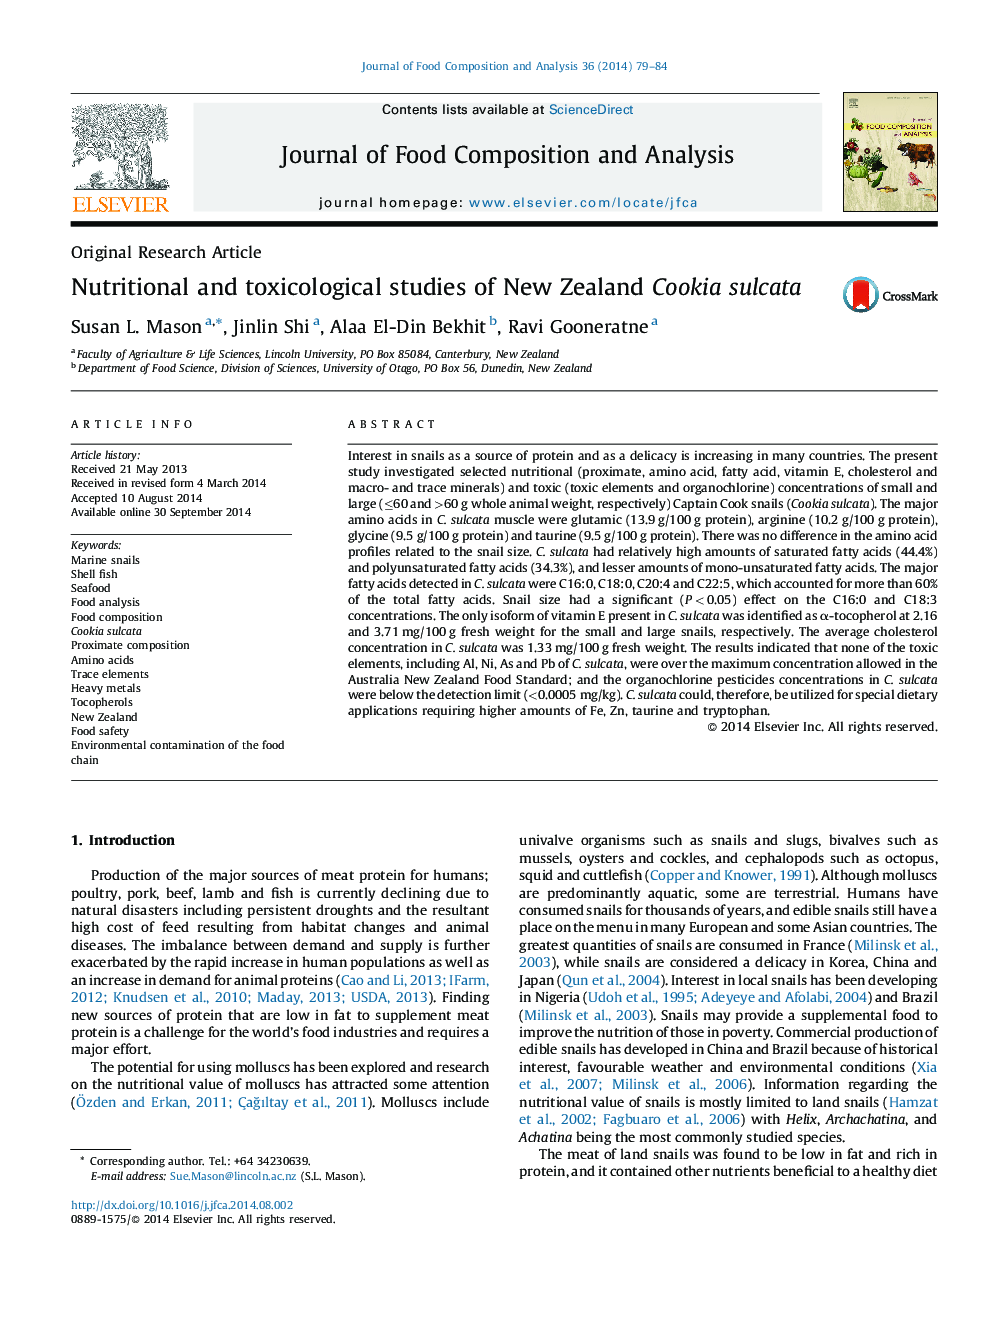 Nutritional and toxicological studies of New Zealand Cookia sulcata